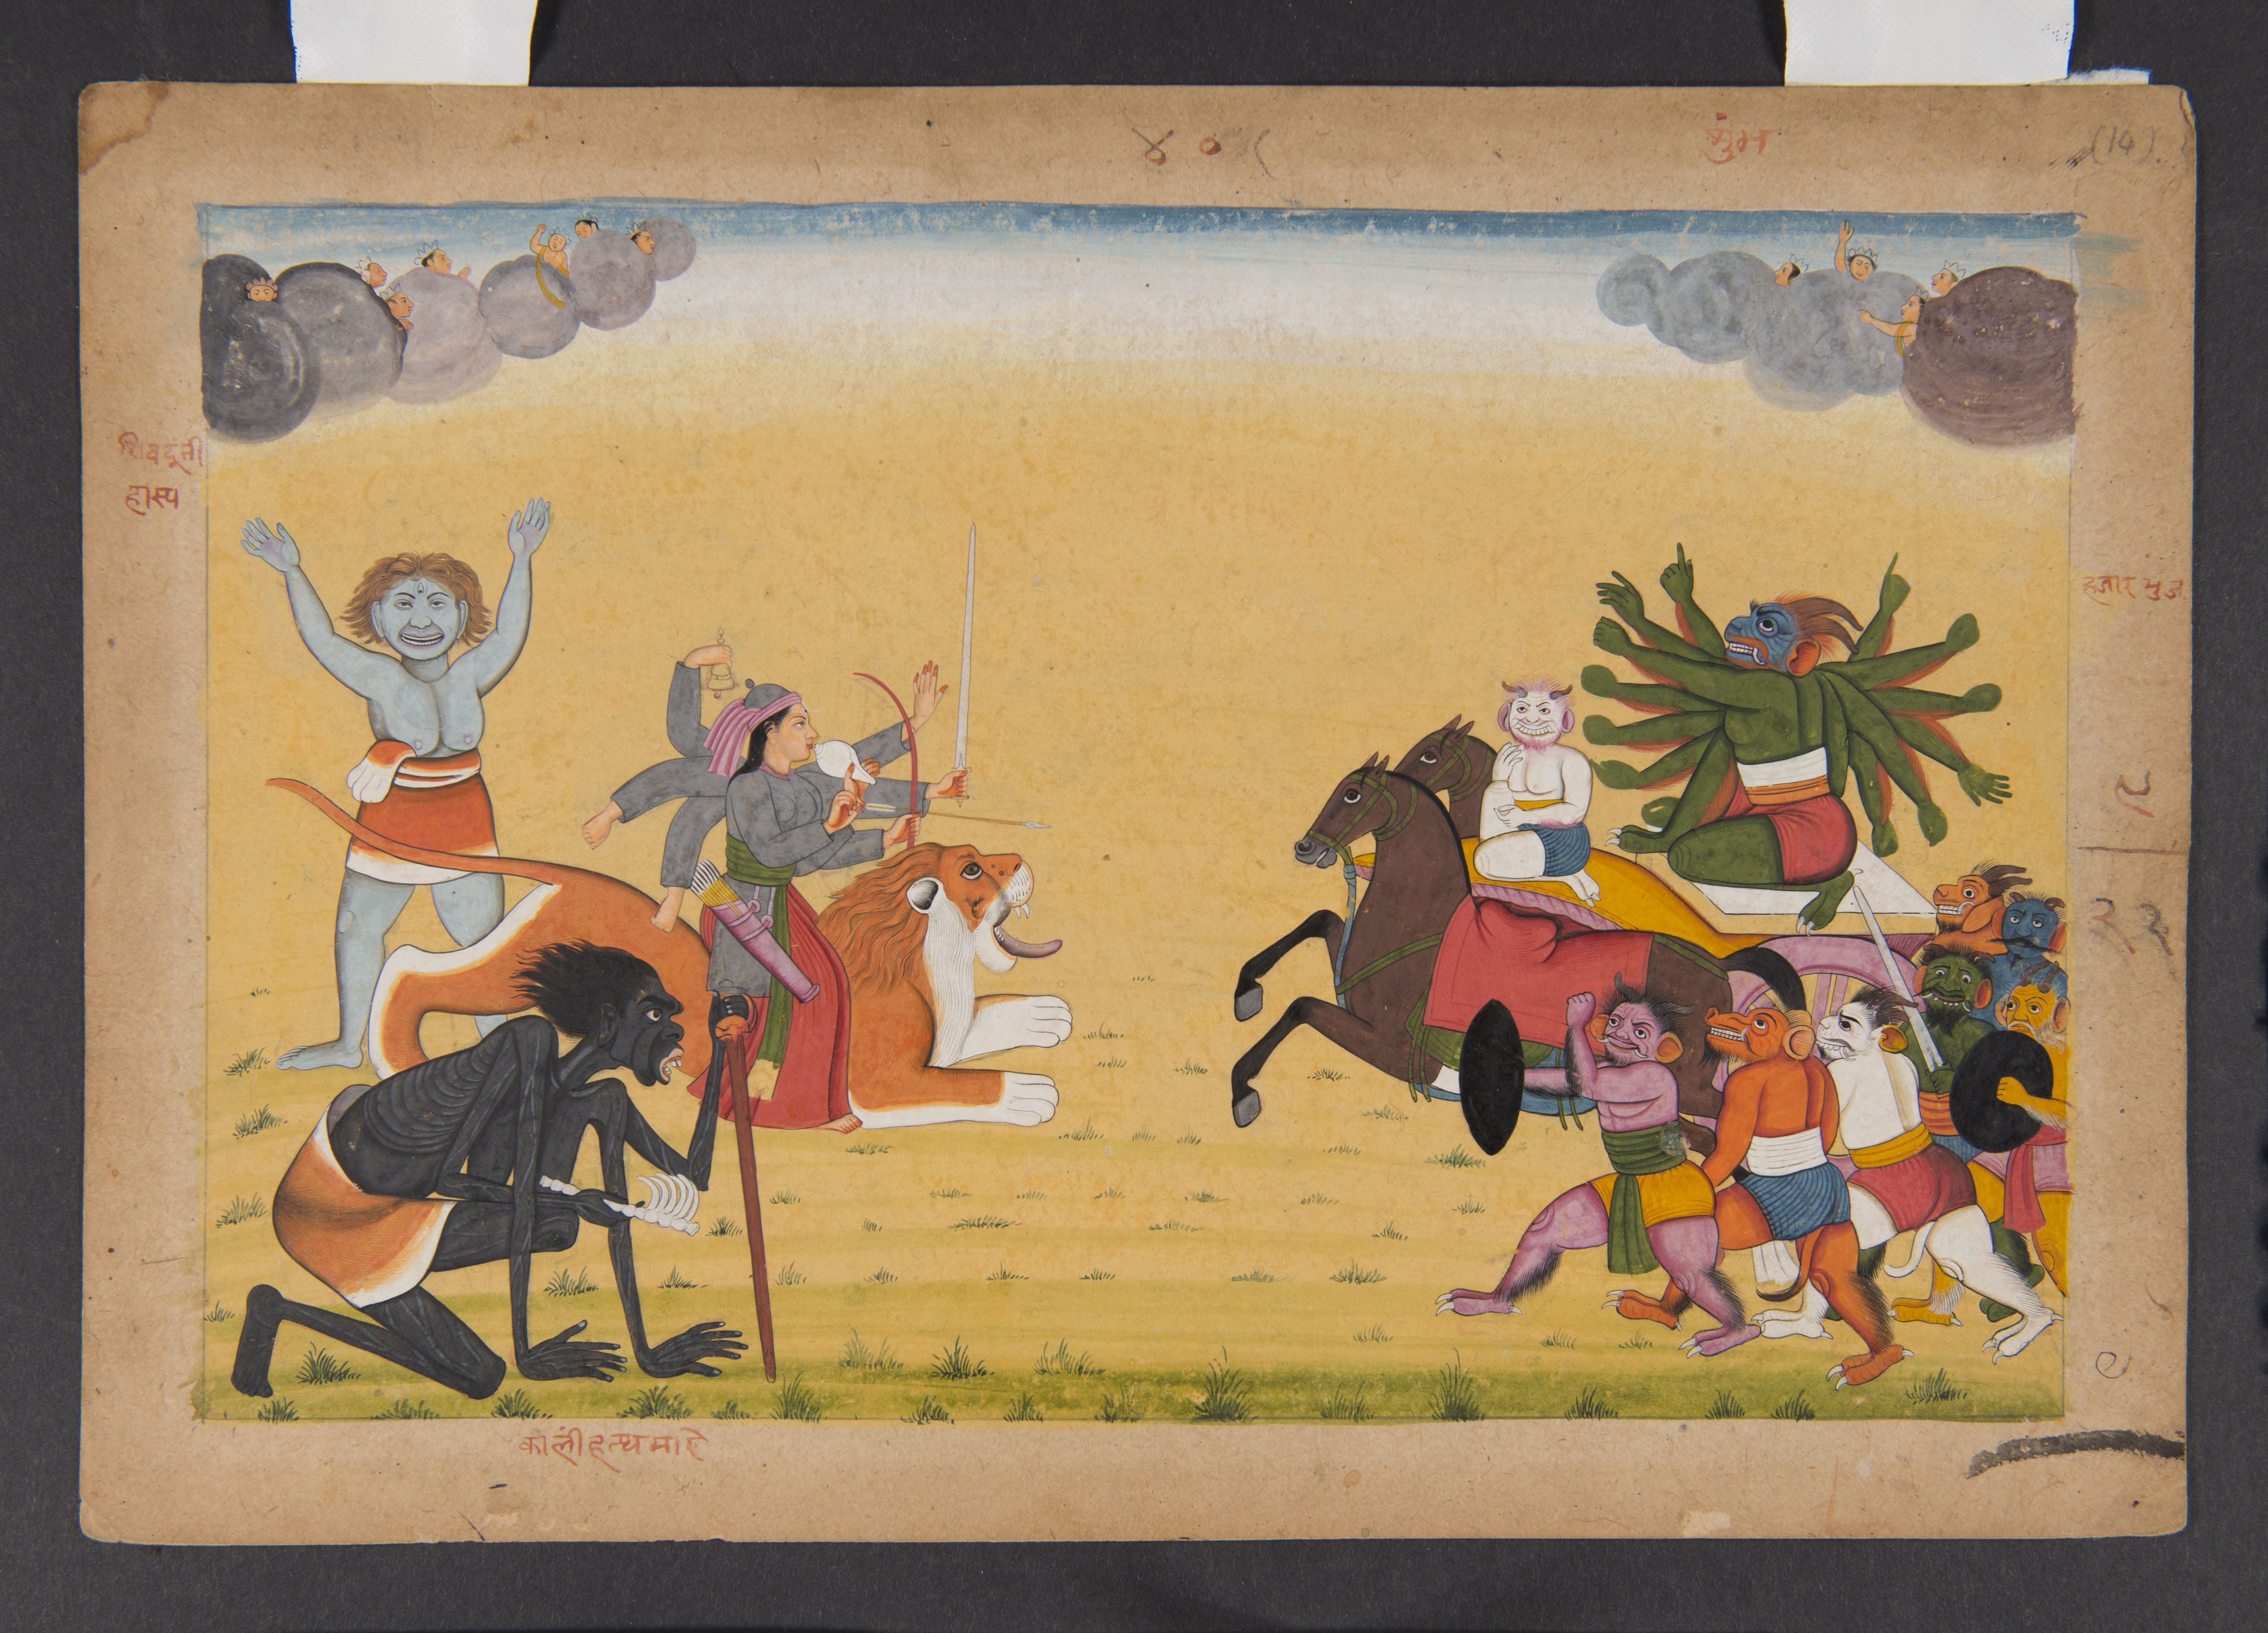 Indian painting of gods and demons on either side before their epic battle